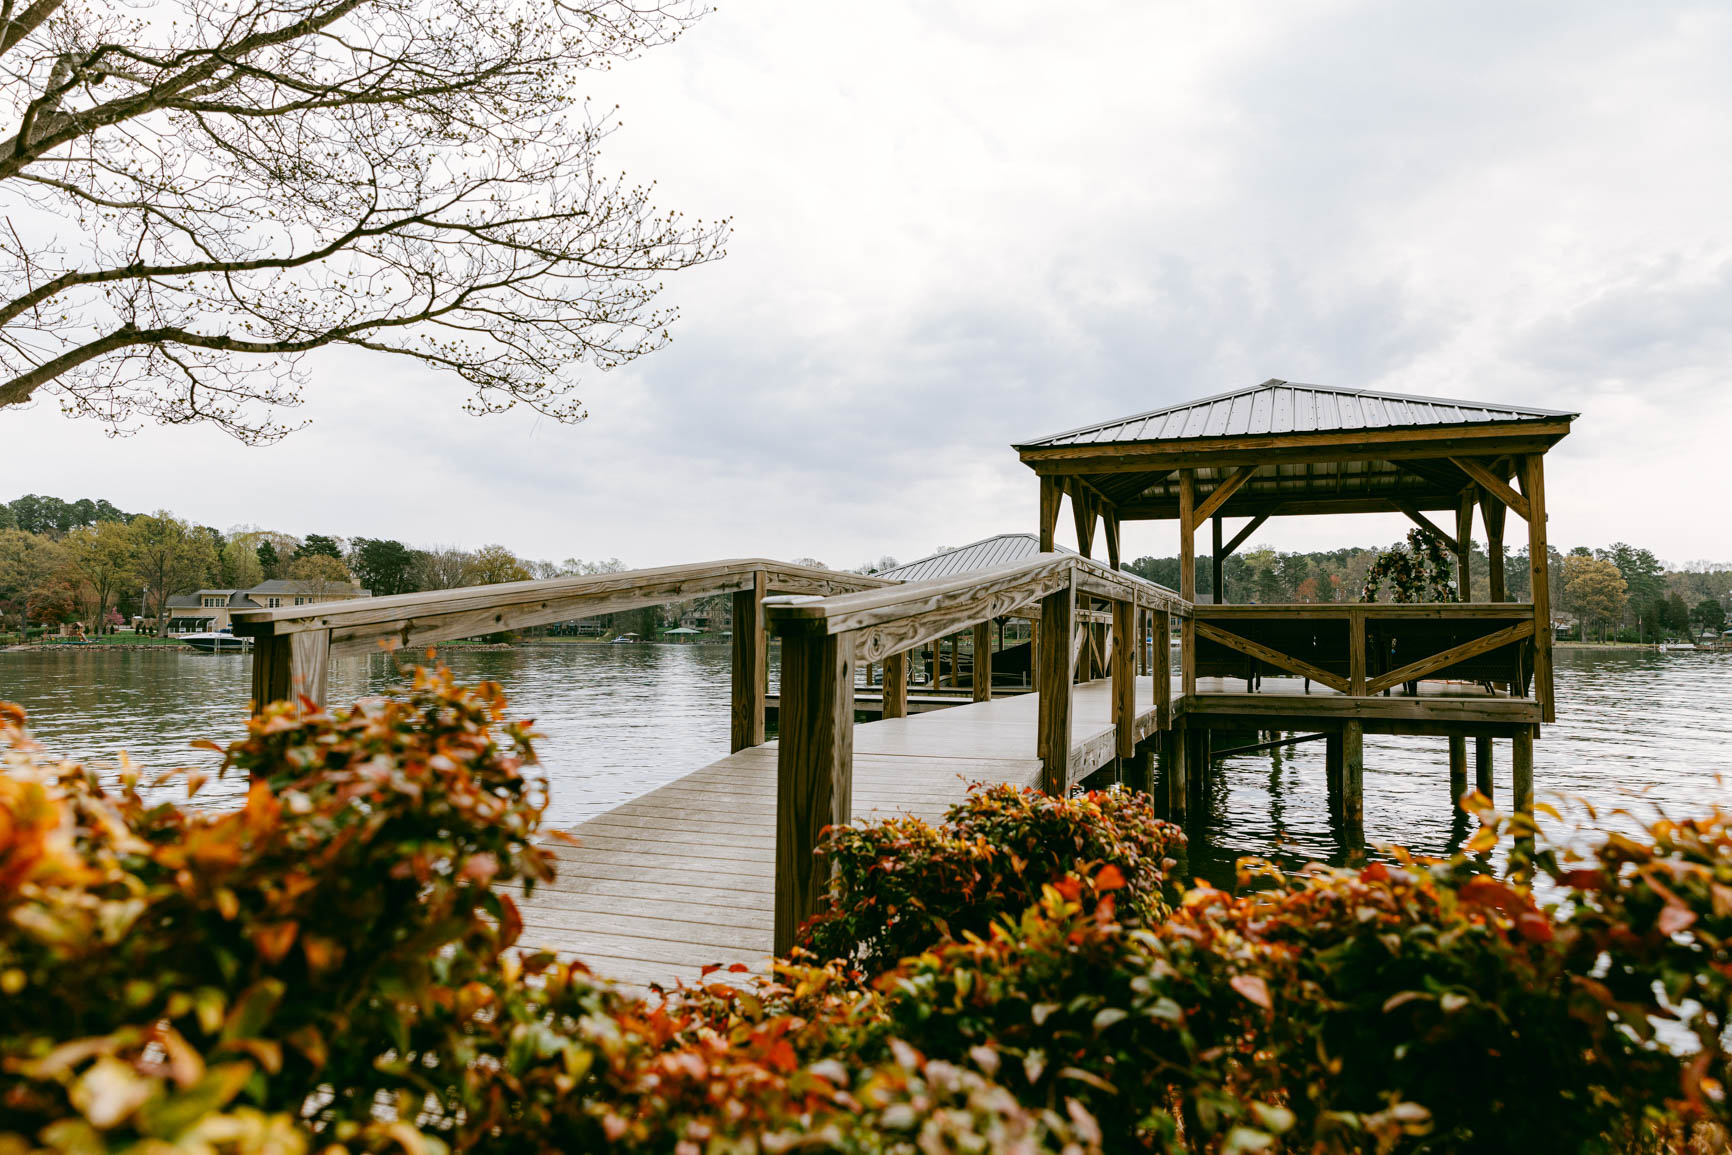 Lake house dock elopement site in Mooresville, NC shot by Nhieu Tang Photography | nhieutang.com